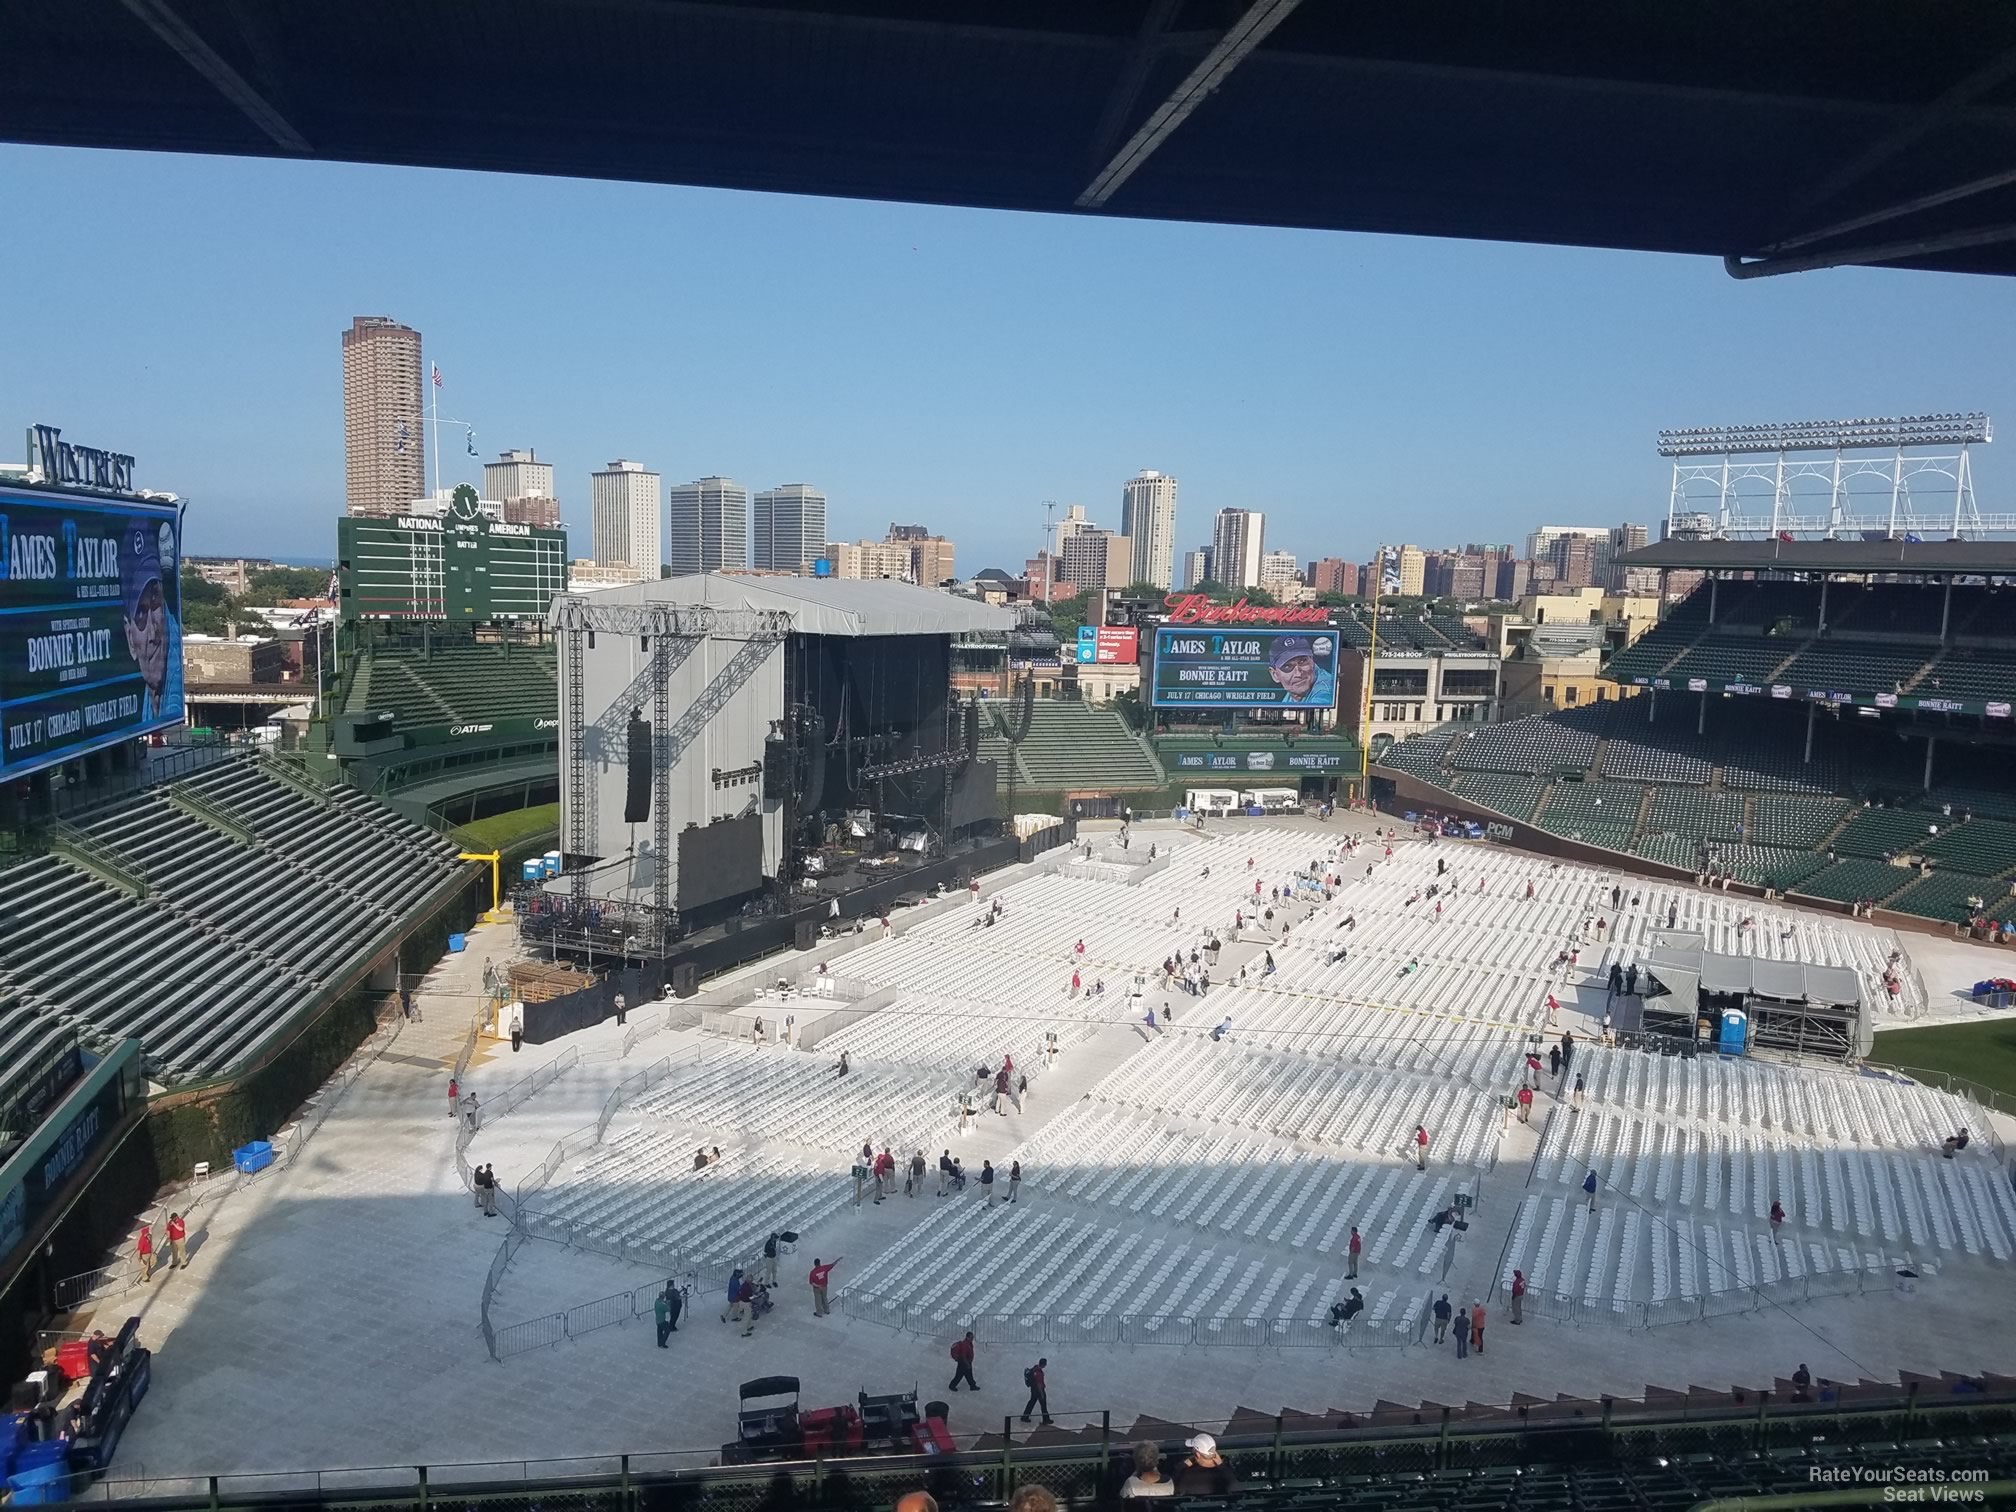 section 404, row 4 seat view  for concert - wrigley field